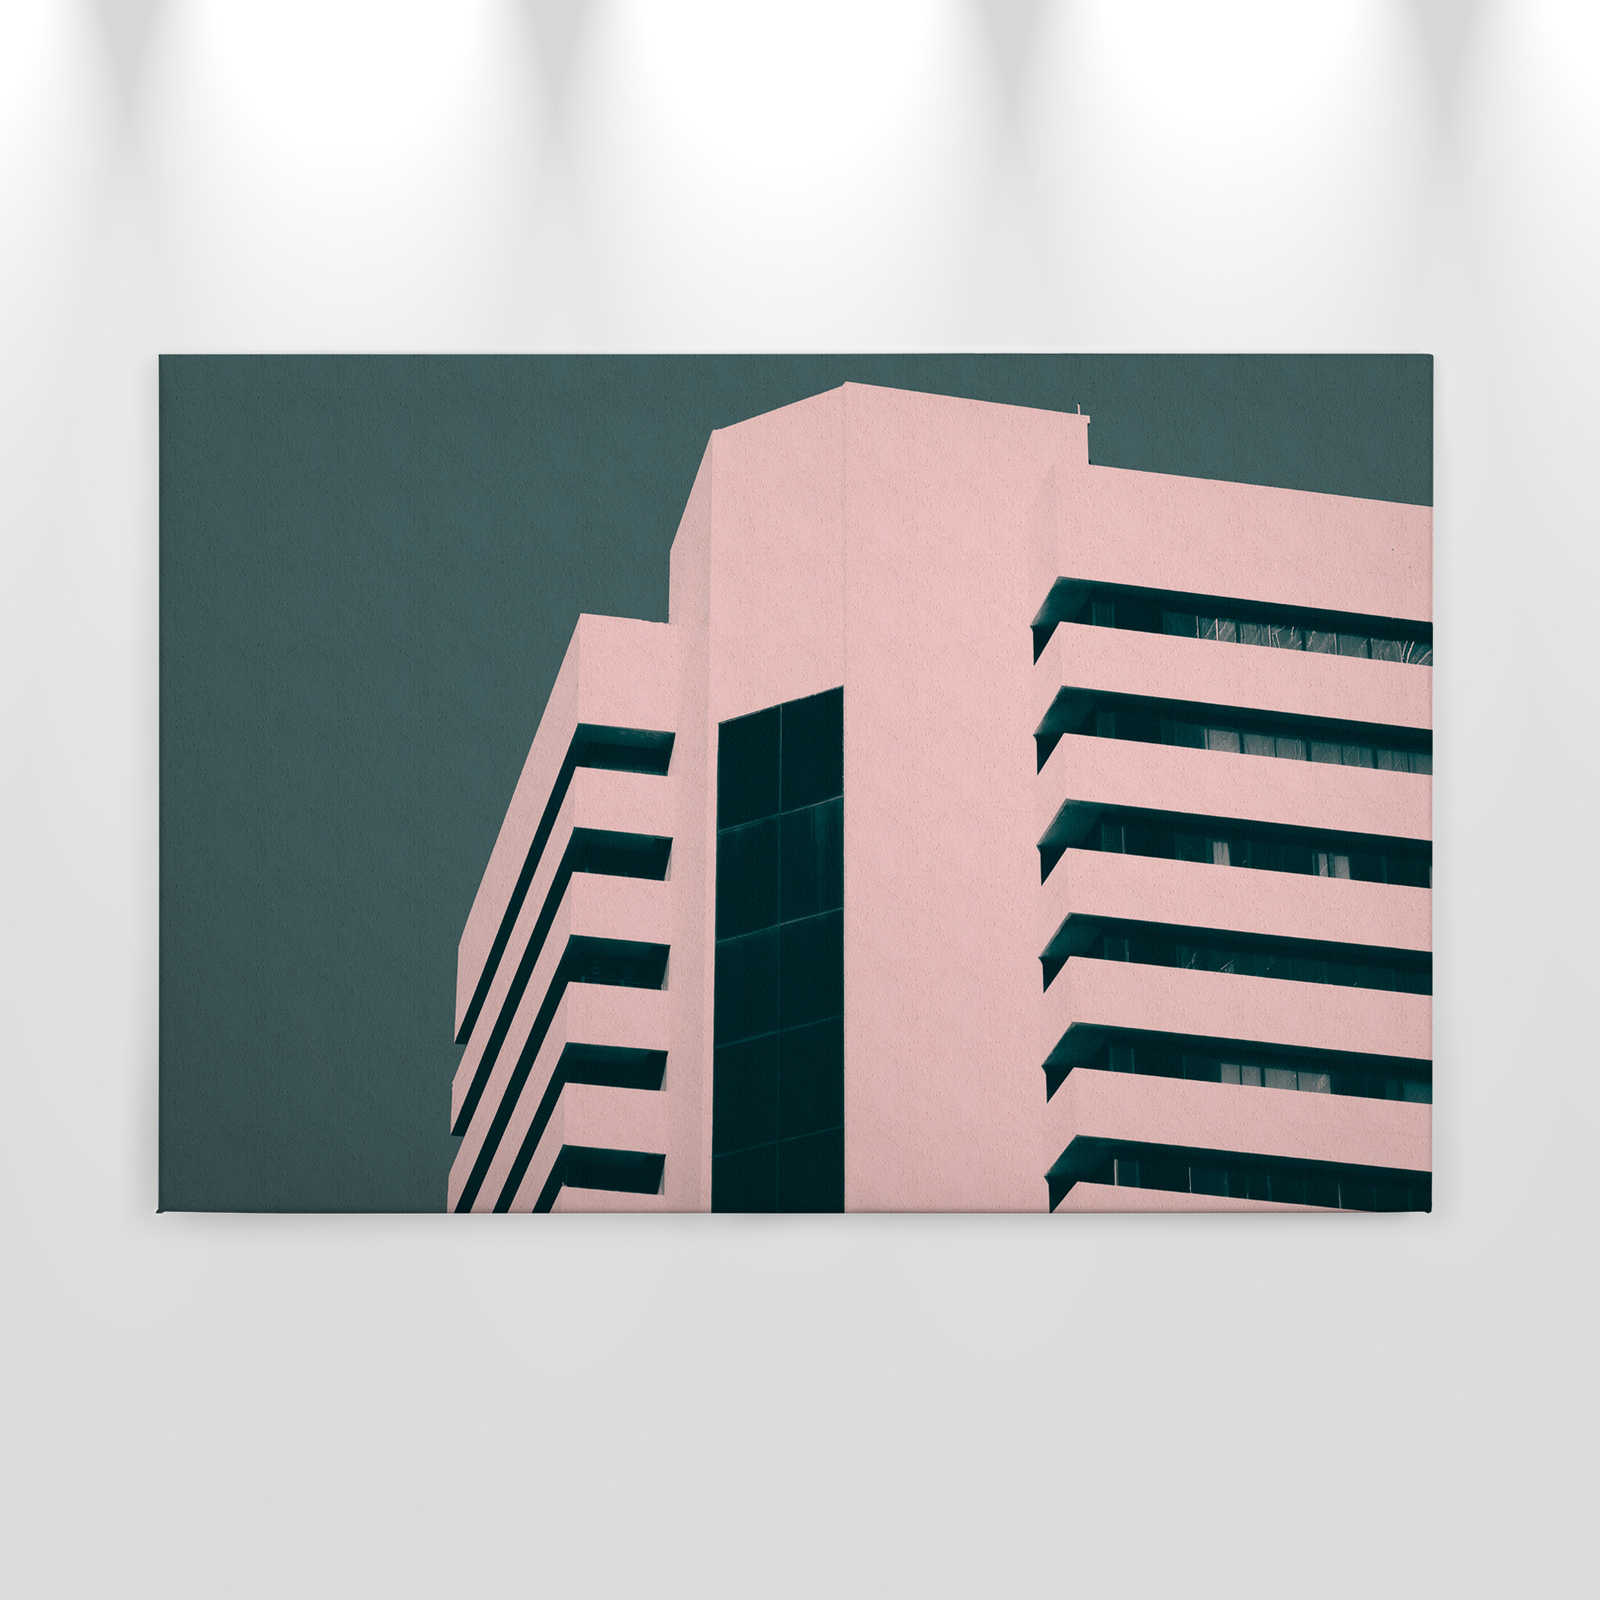             Skyscraper 2 - Canvas painting with modern city architecture - roughcast structure - 0.90 m x 0.60 m
        